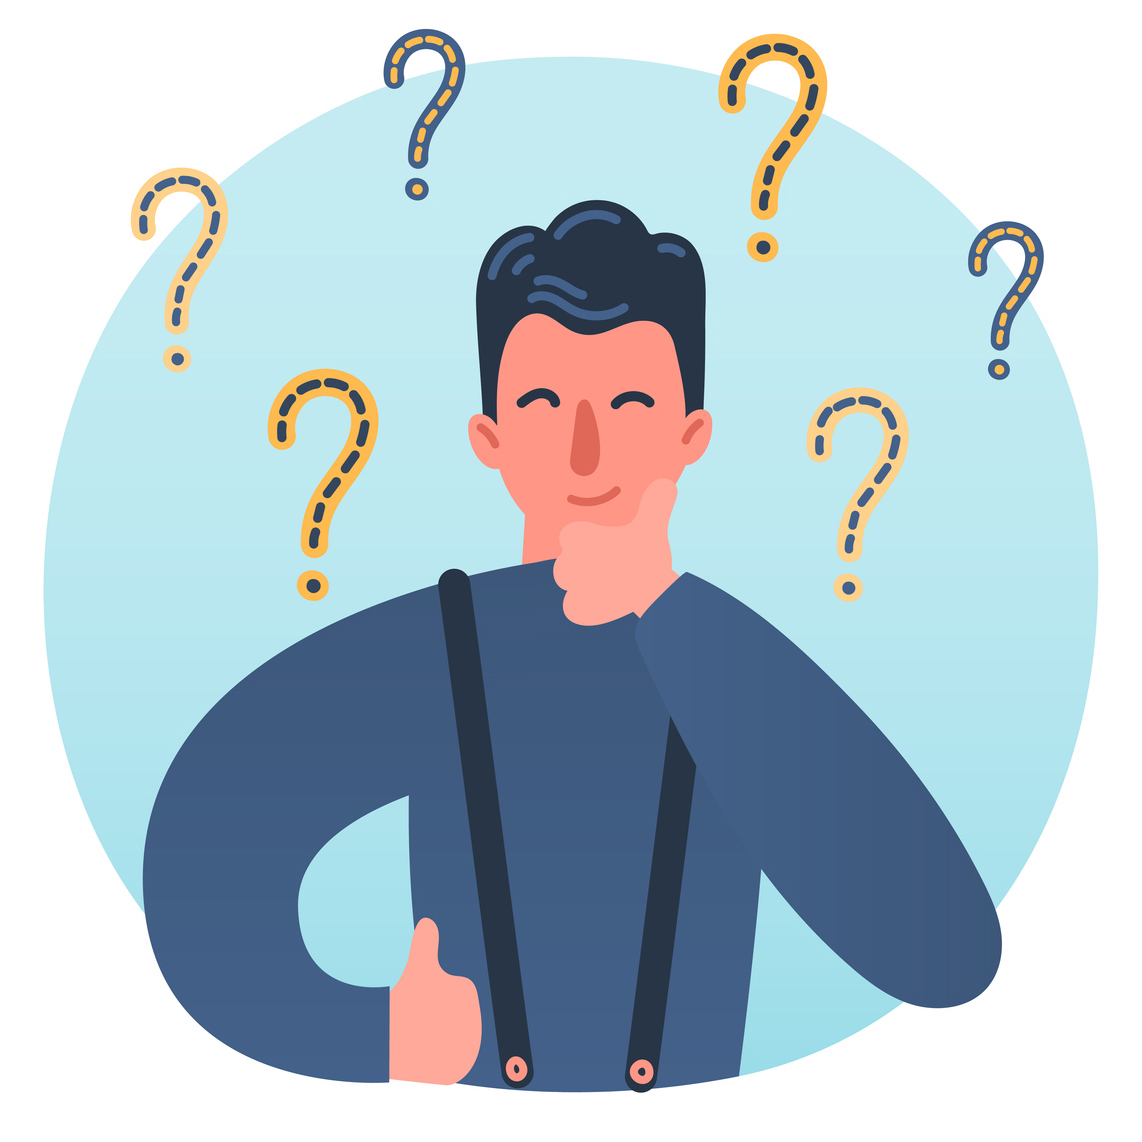 An illustrated male character surrounded by question marks